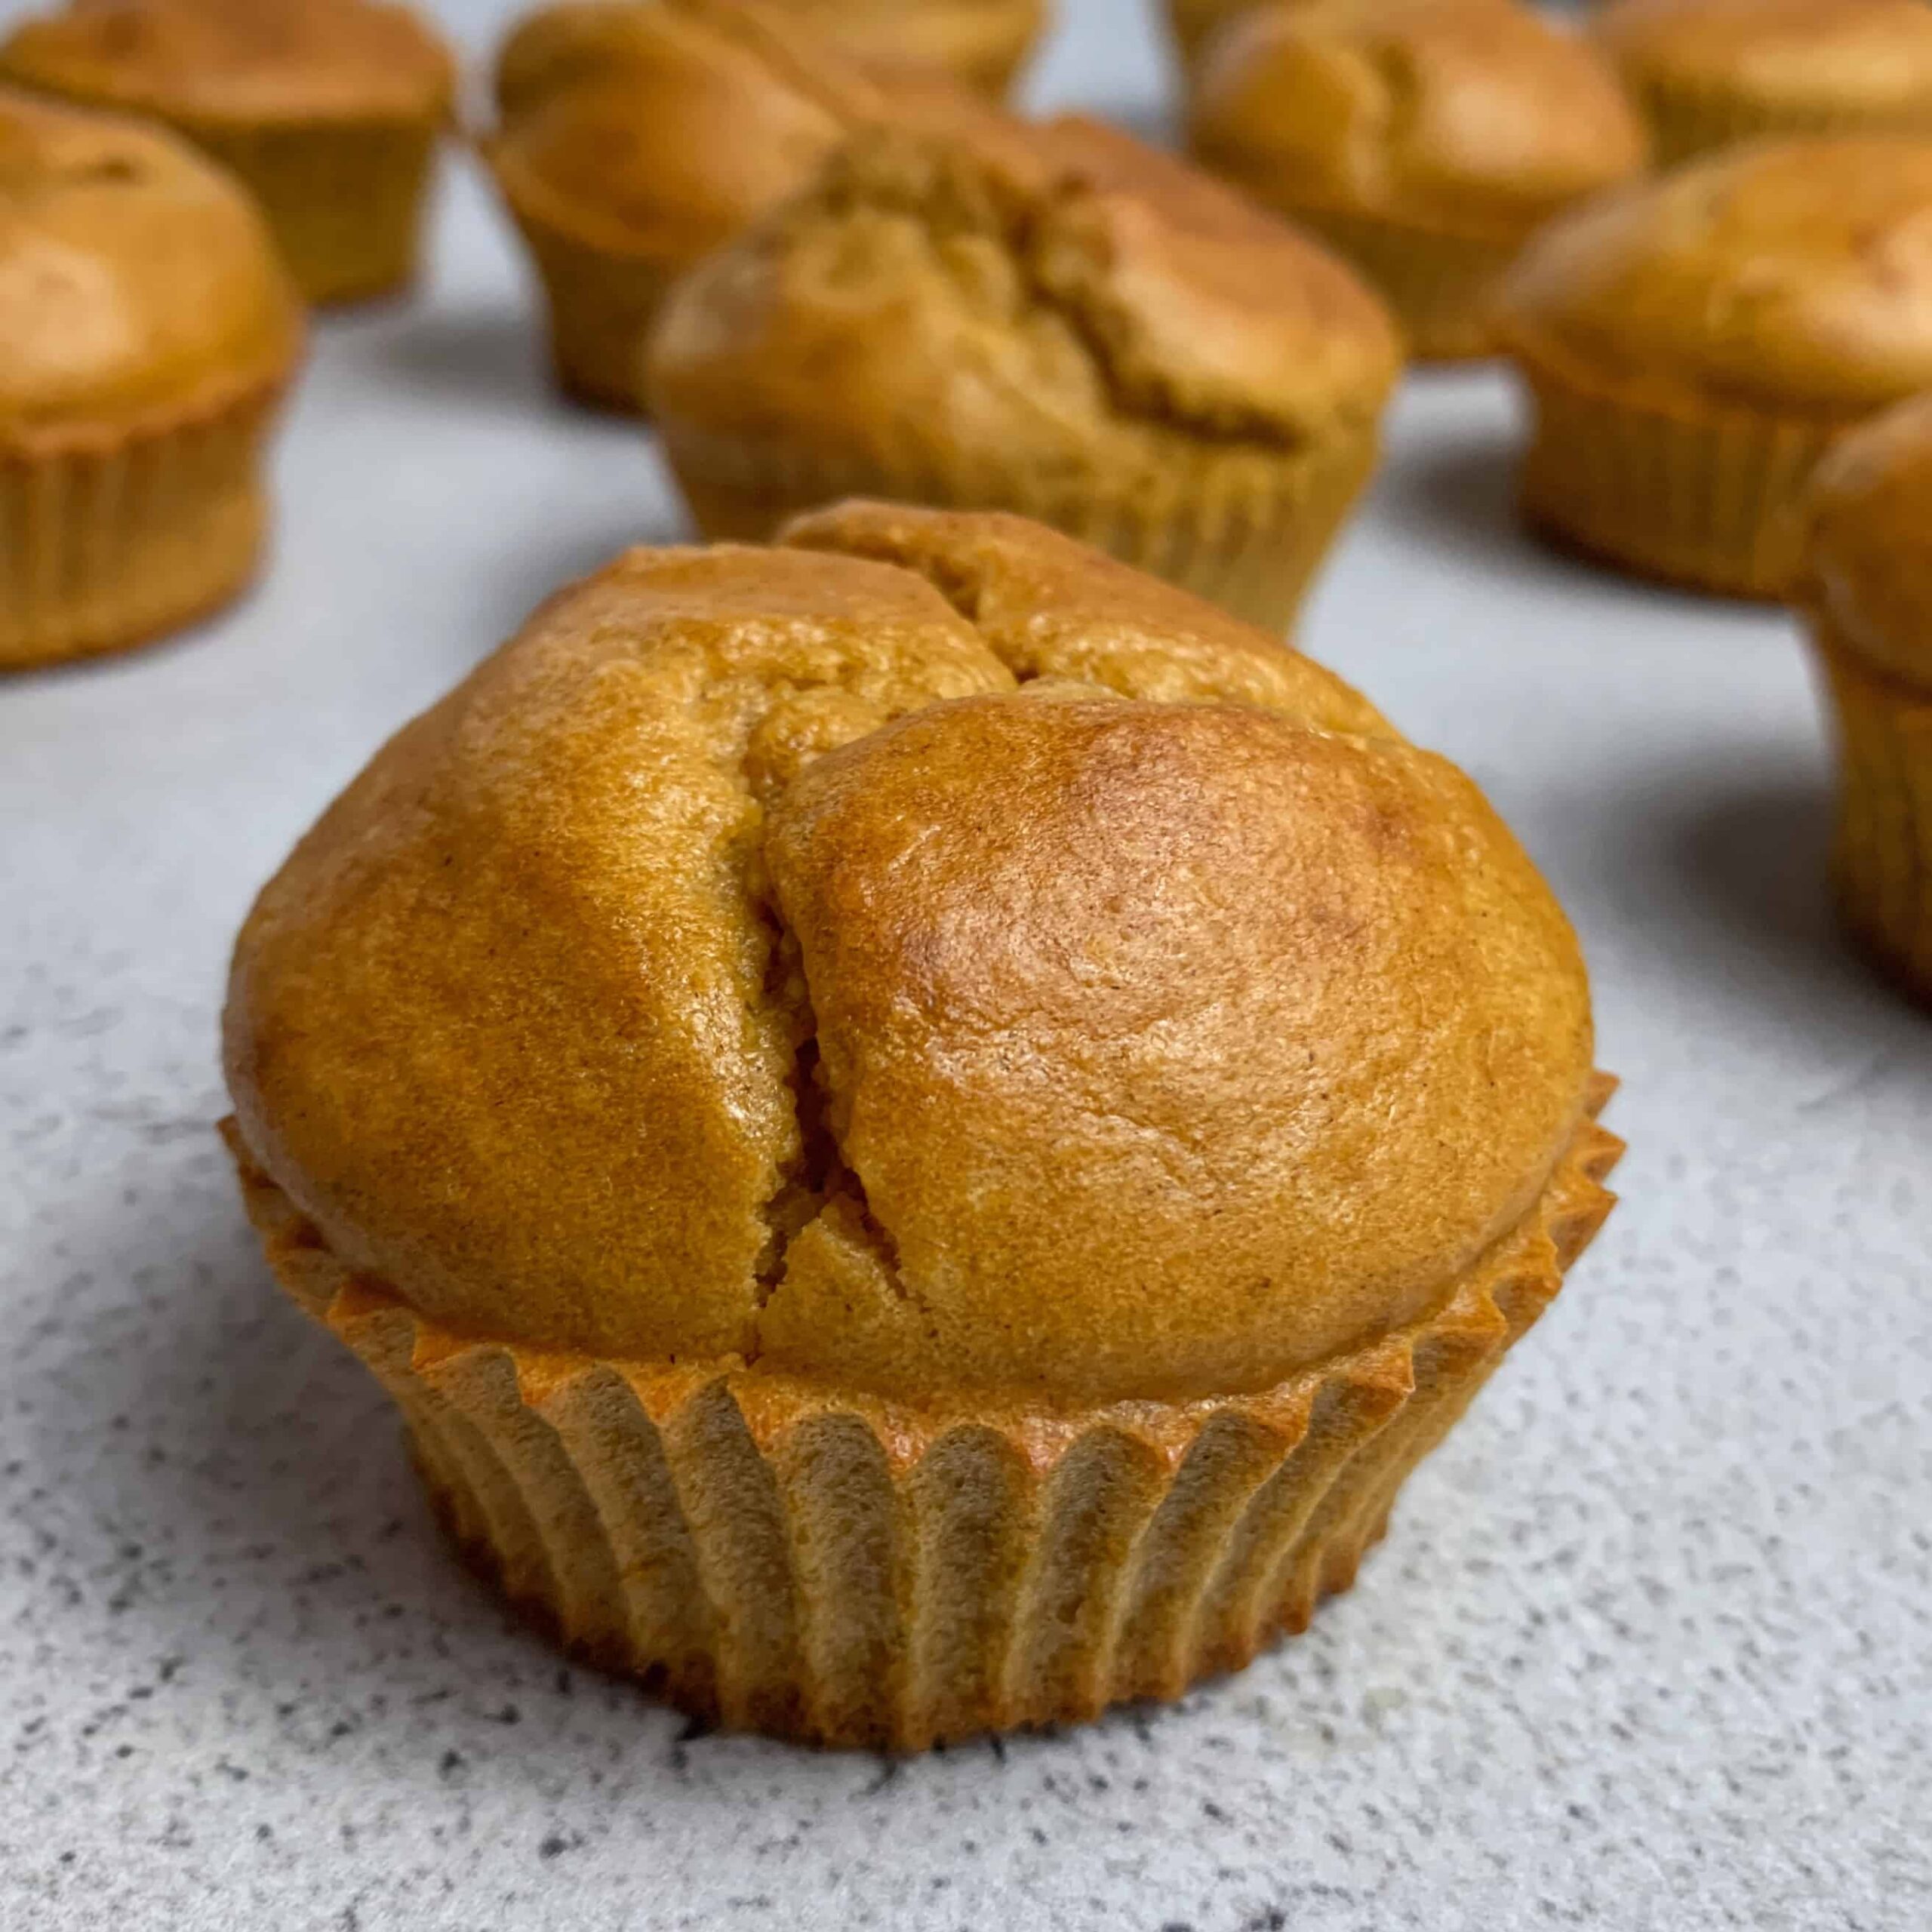 The Easiest Low Carb Pumpkin Protein Muffins Recipe